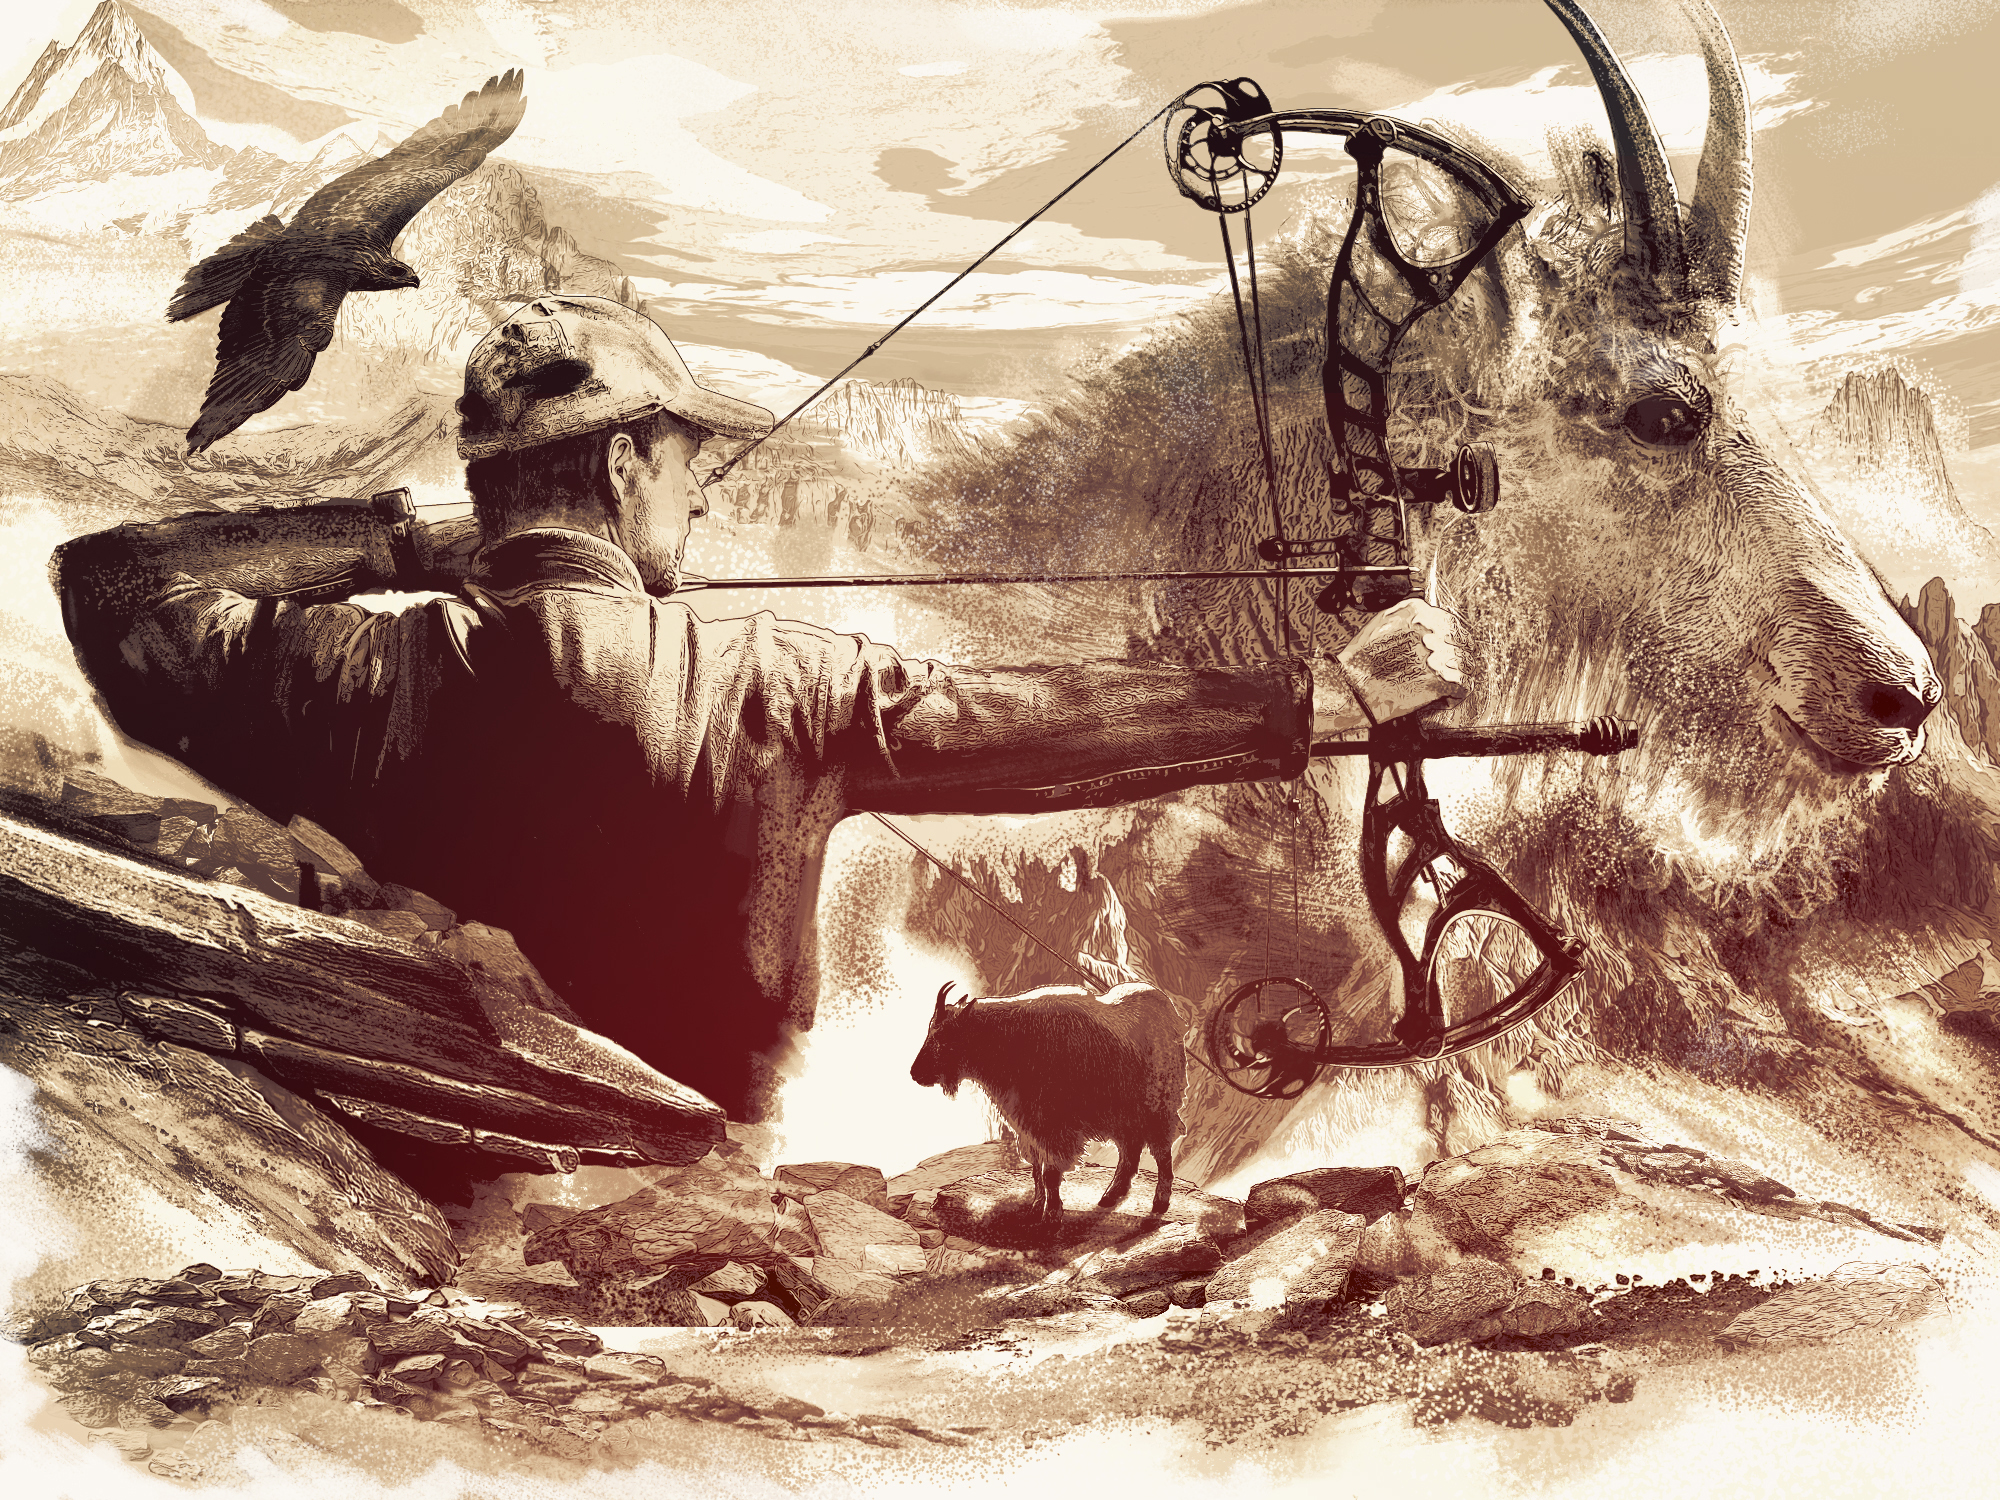 montage of bowhunter, goats, mountains, birds